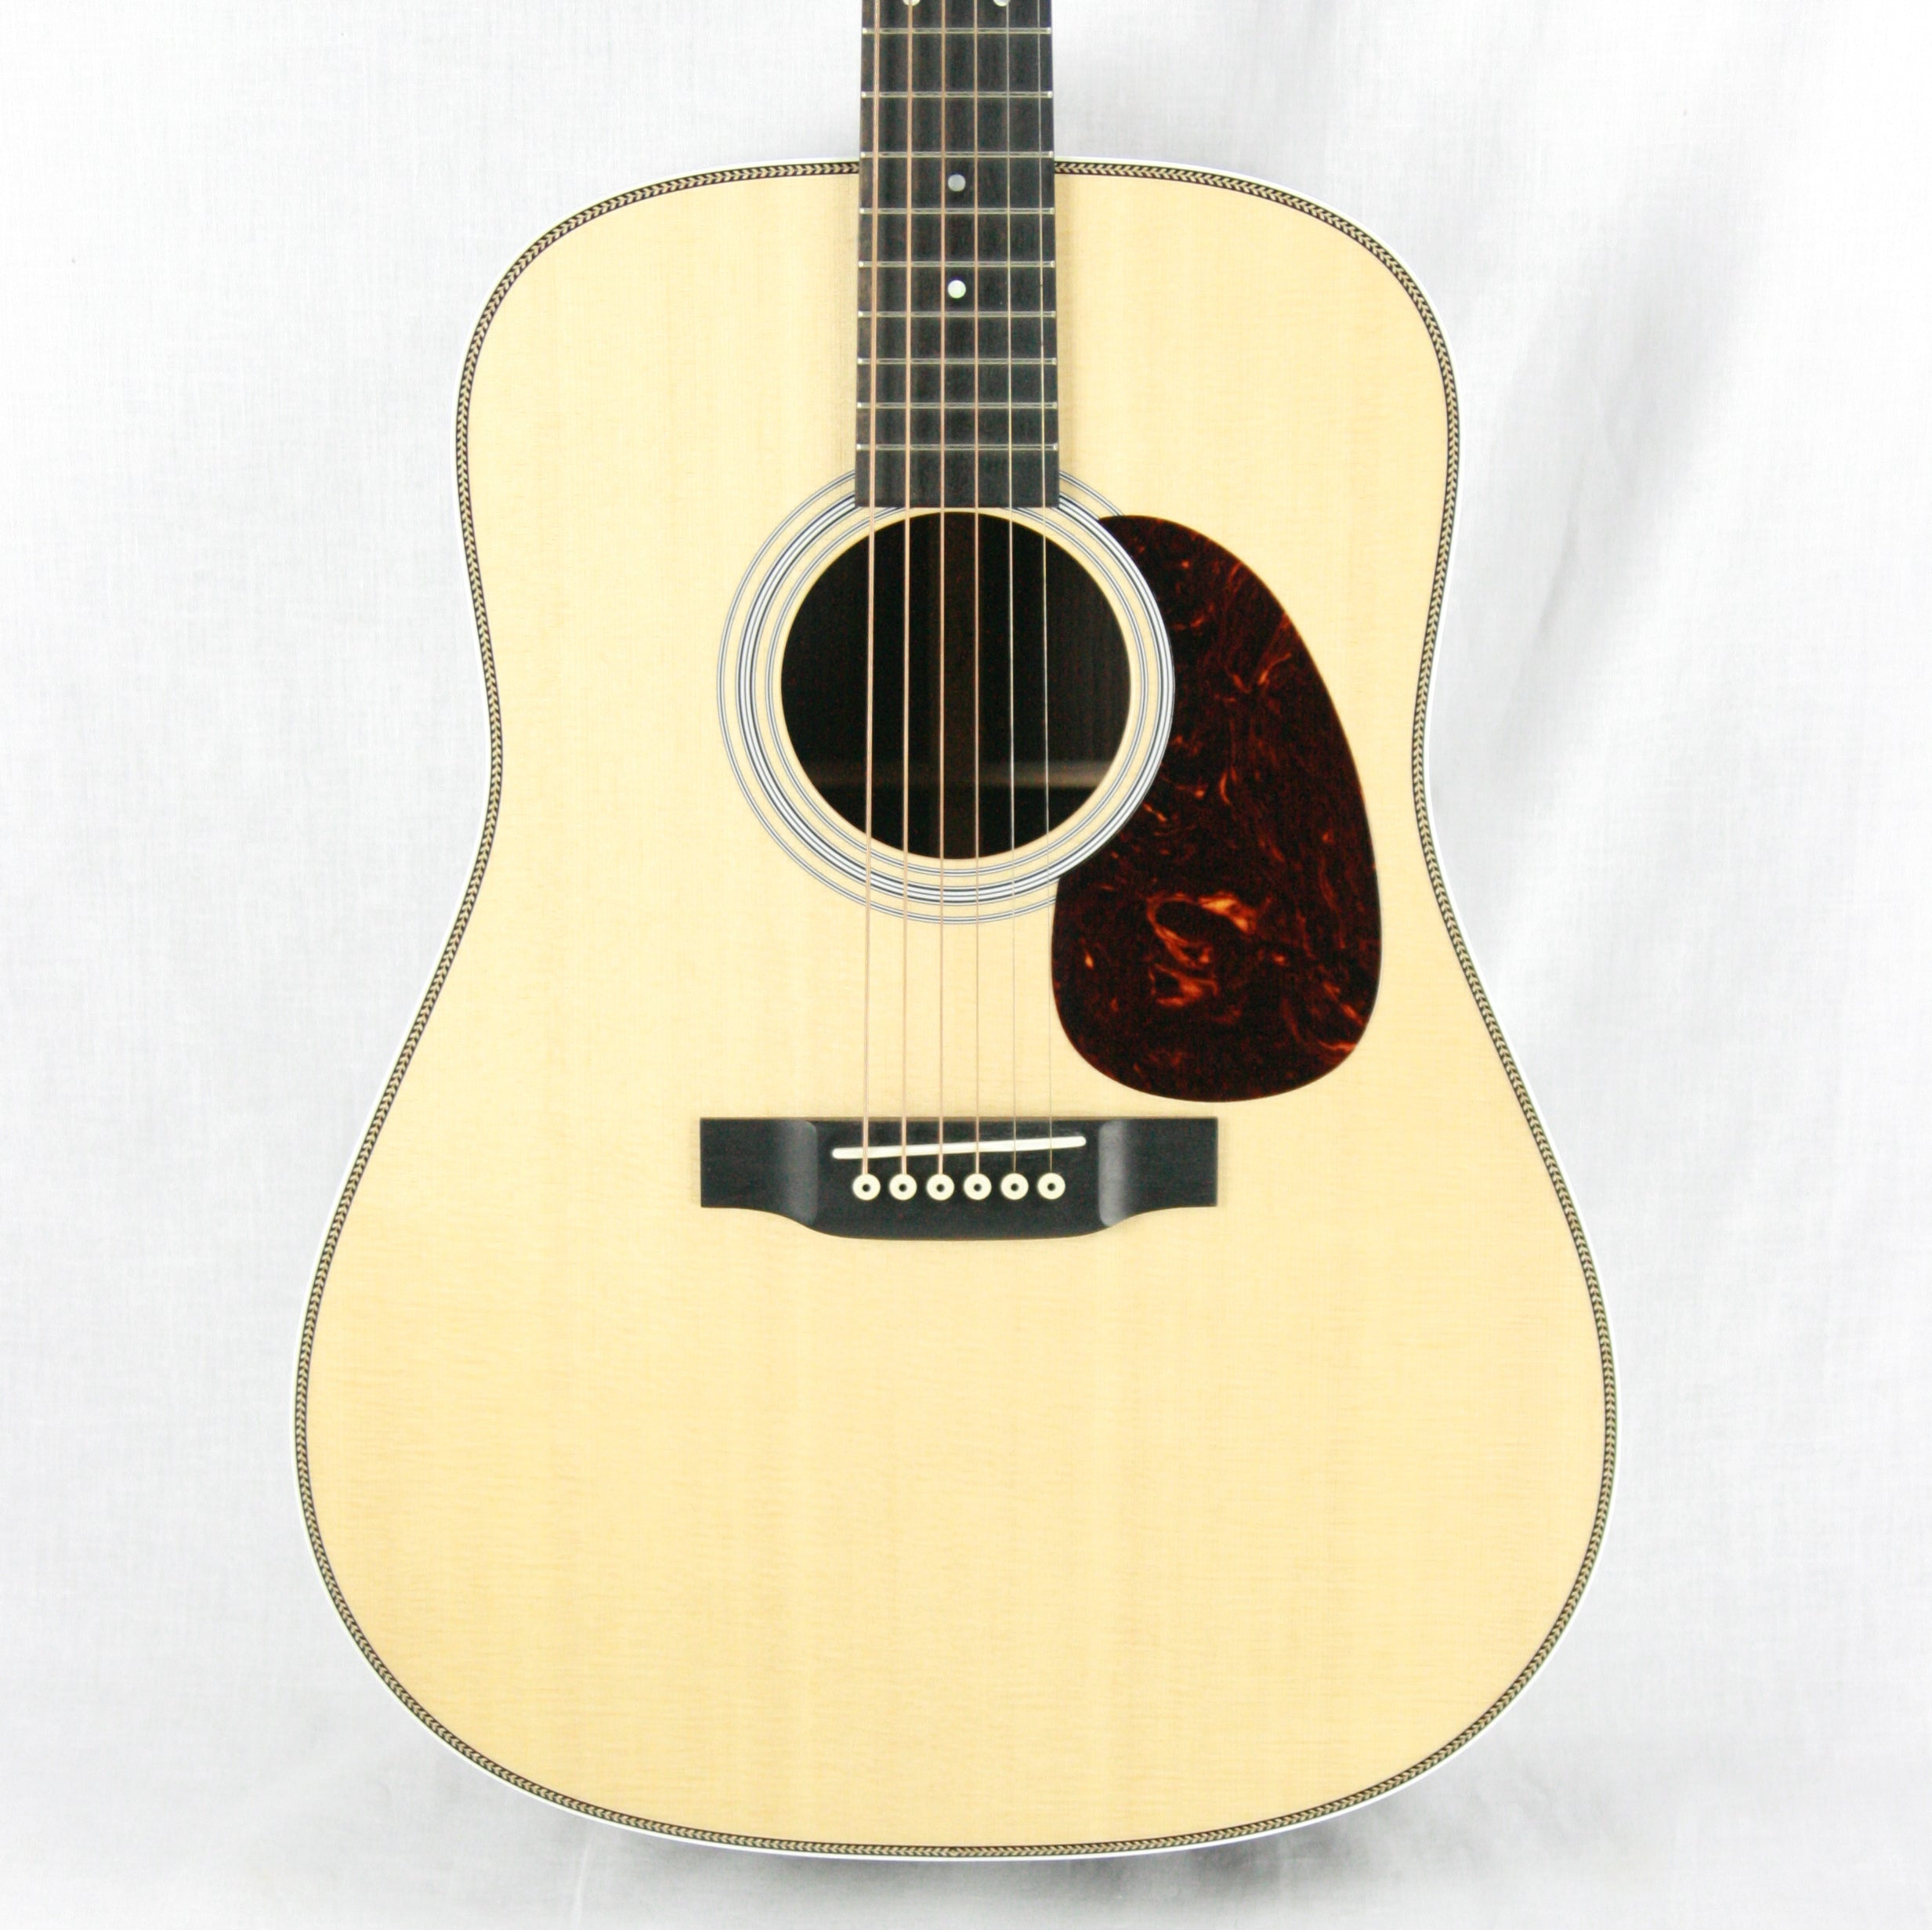 *SOLD*  2016 Martin Custom Shop HD-28 Short Scale! Sitka Top & Rosewood Back/Sides! Gloss Finish